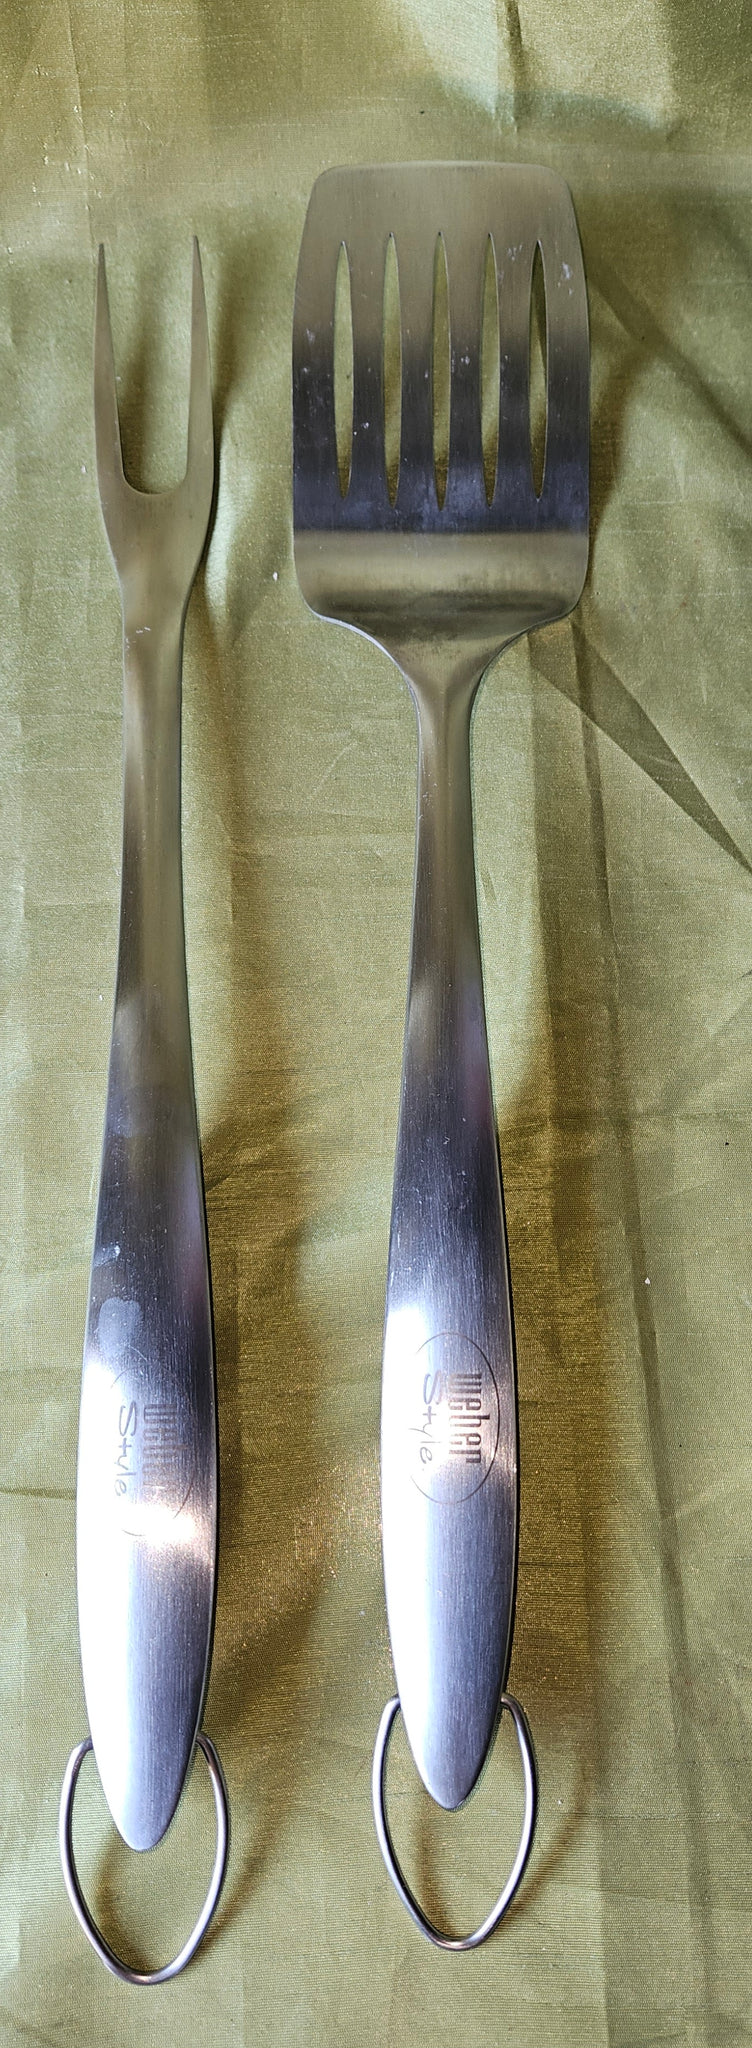 Set of Two WEBER STYLE 18" Stainless Steel BBQ Barbeque Tools